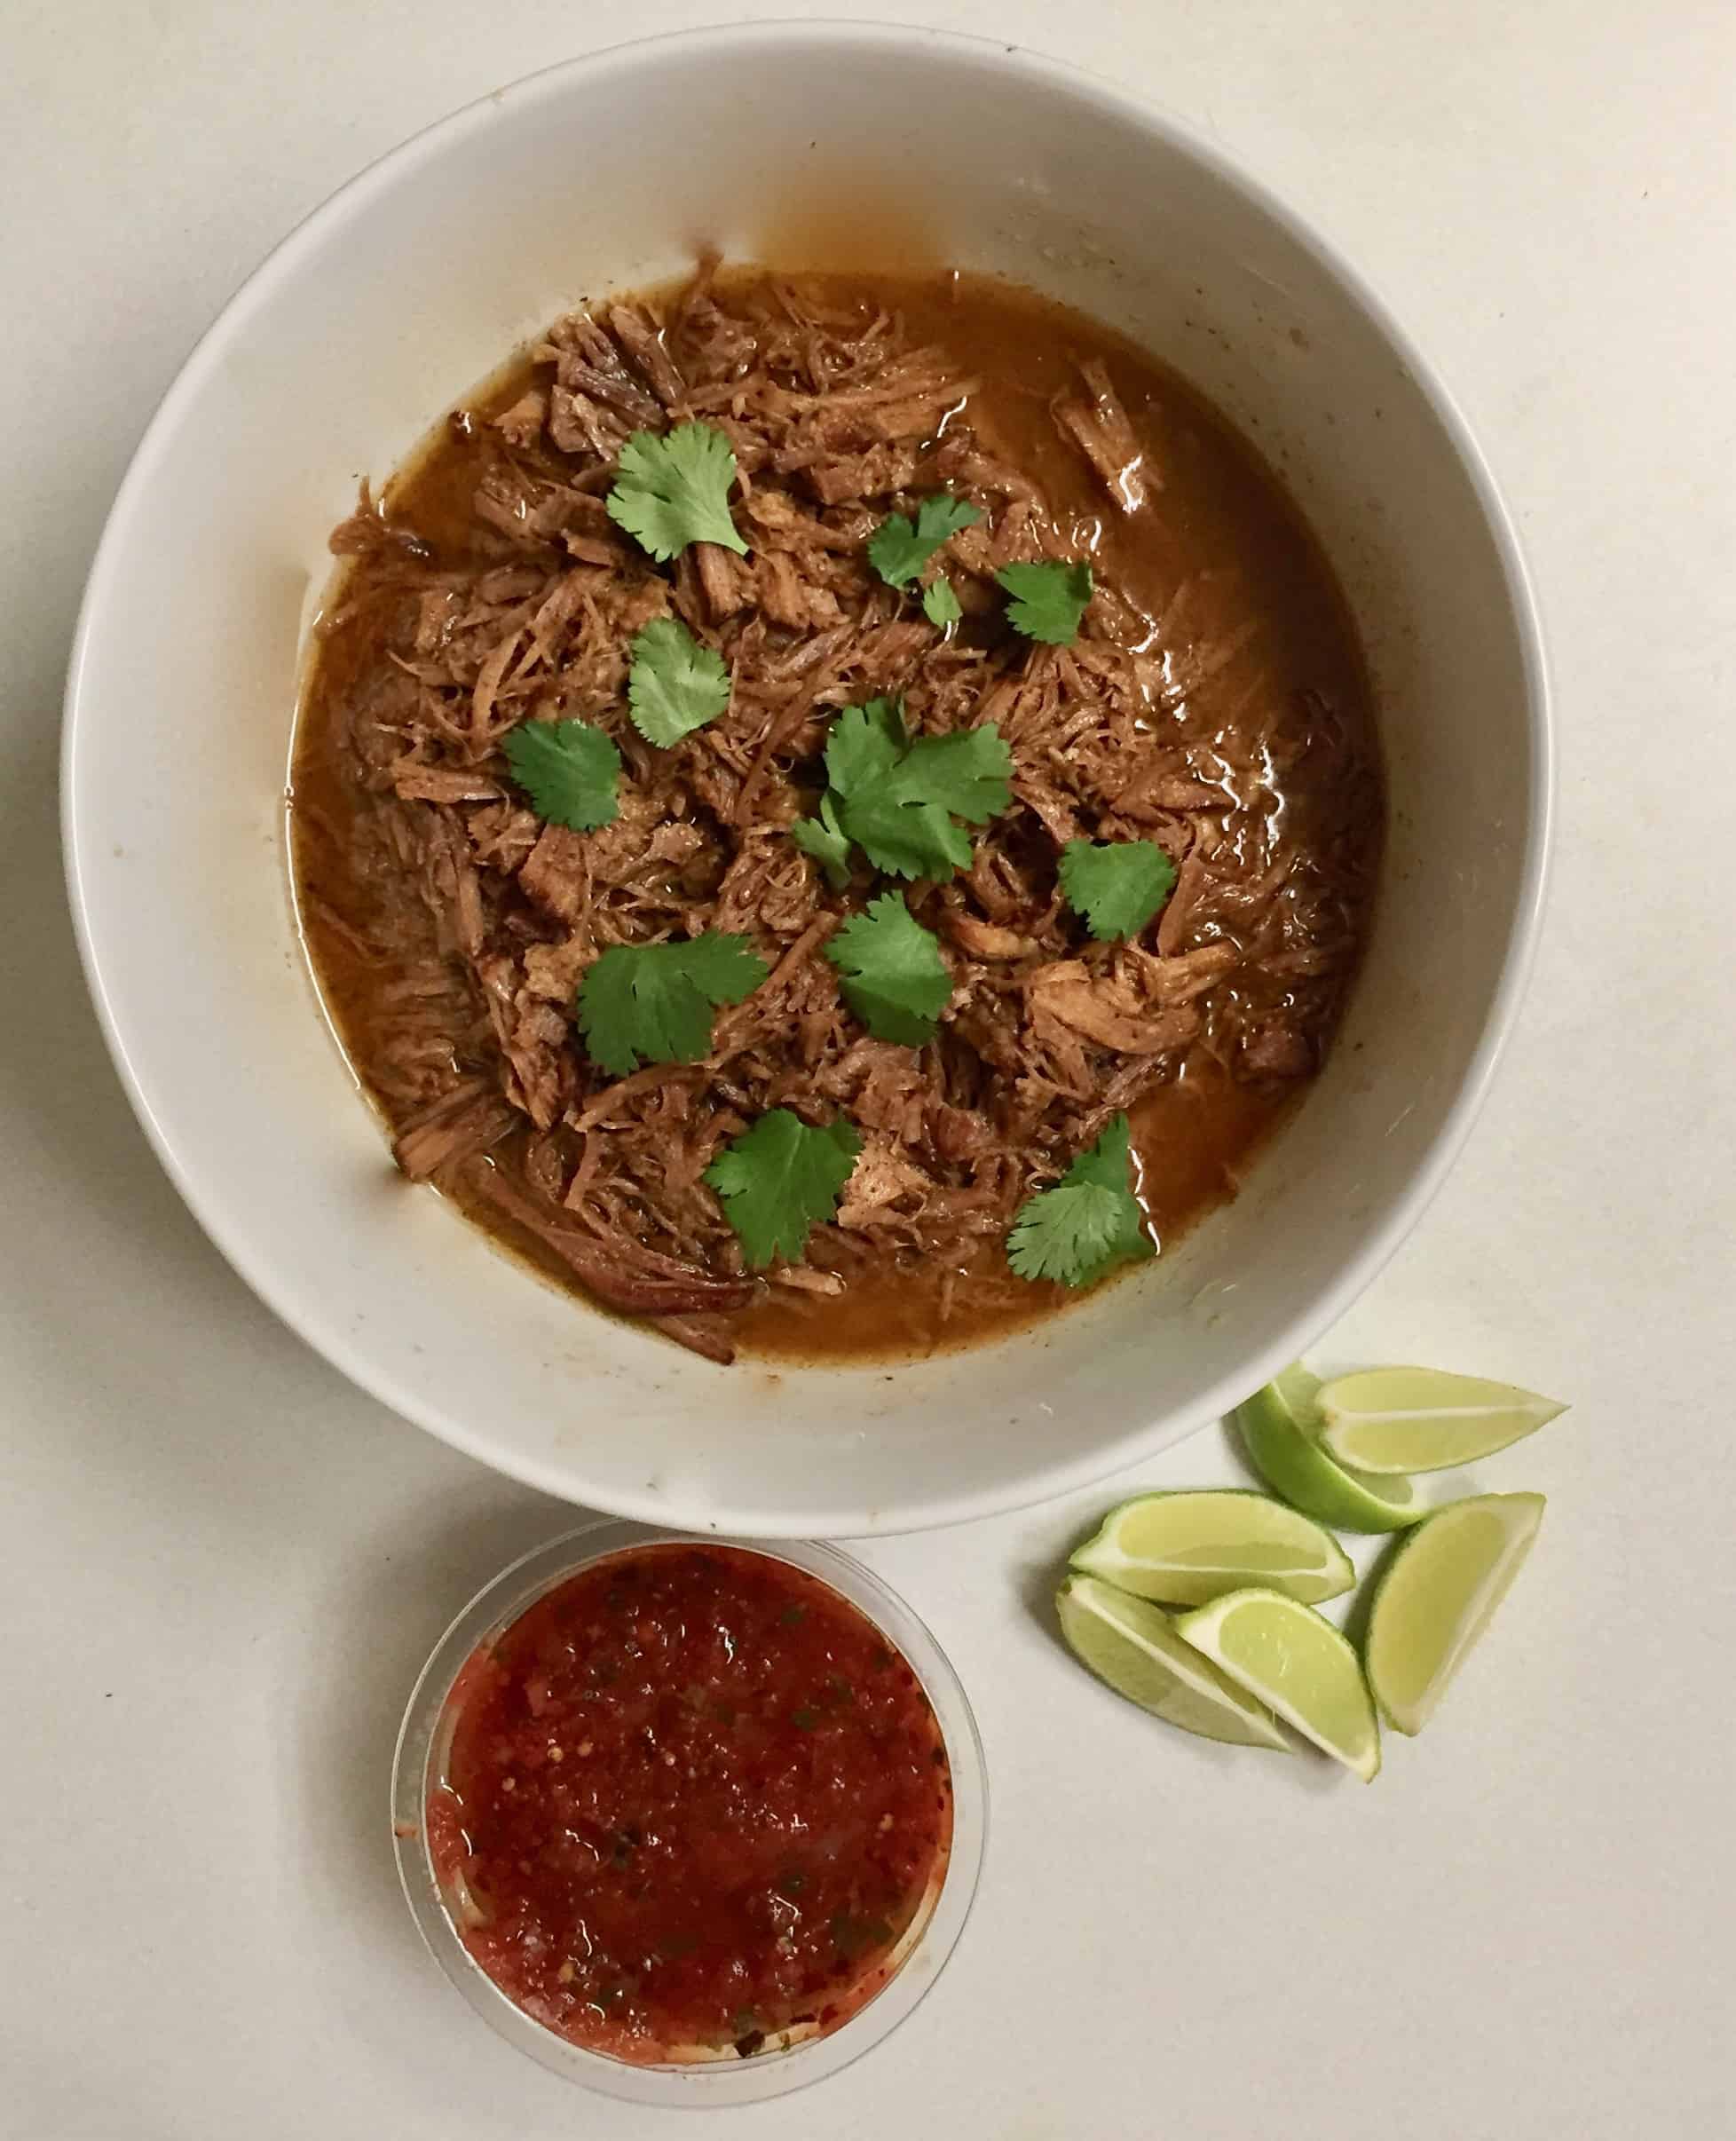 About that Instant Pot and one recipe for Garlicky Cuban Pulled Pork you should make whether you have one or not…